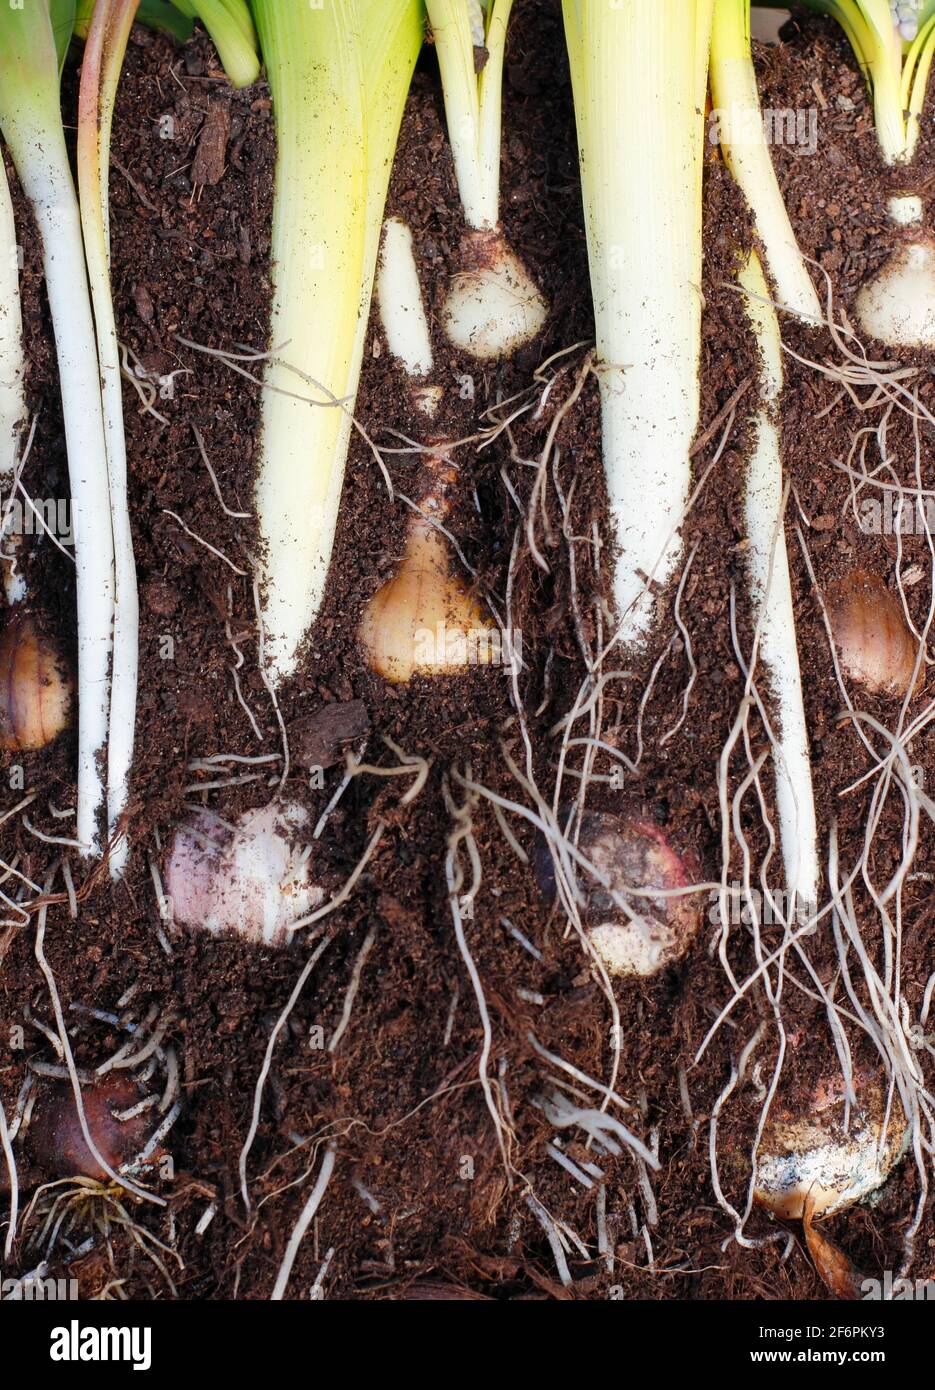 Bulb lasagne cross section. Muscari, narcissus, hyacinth and tulip bulbs layered in a pot for a dense, successional flower display. Stock Photo